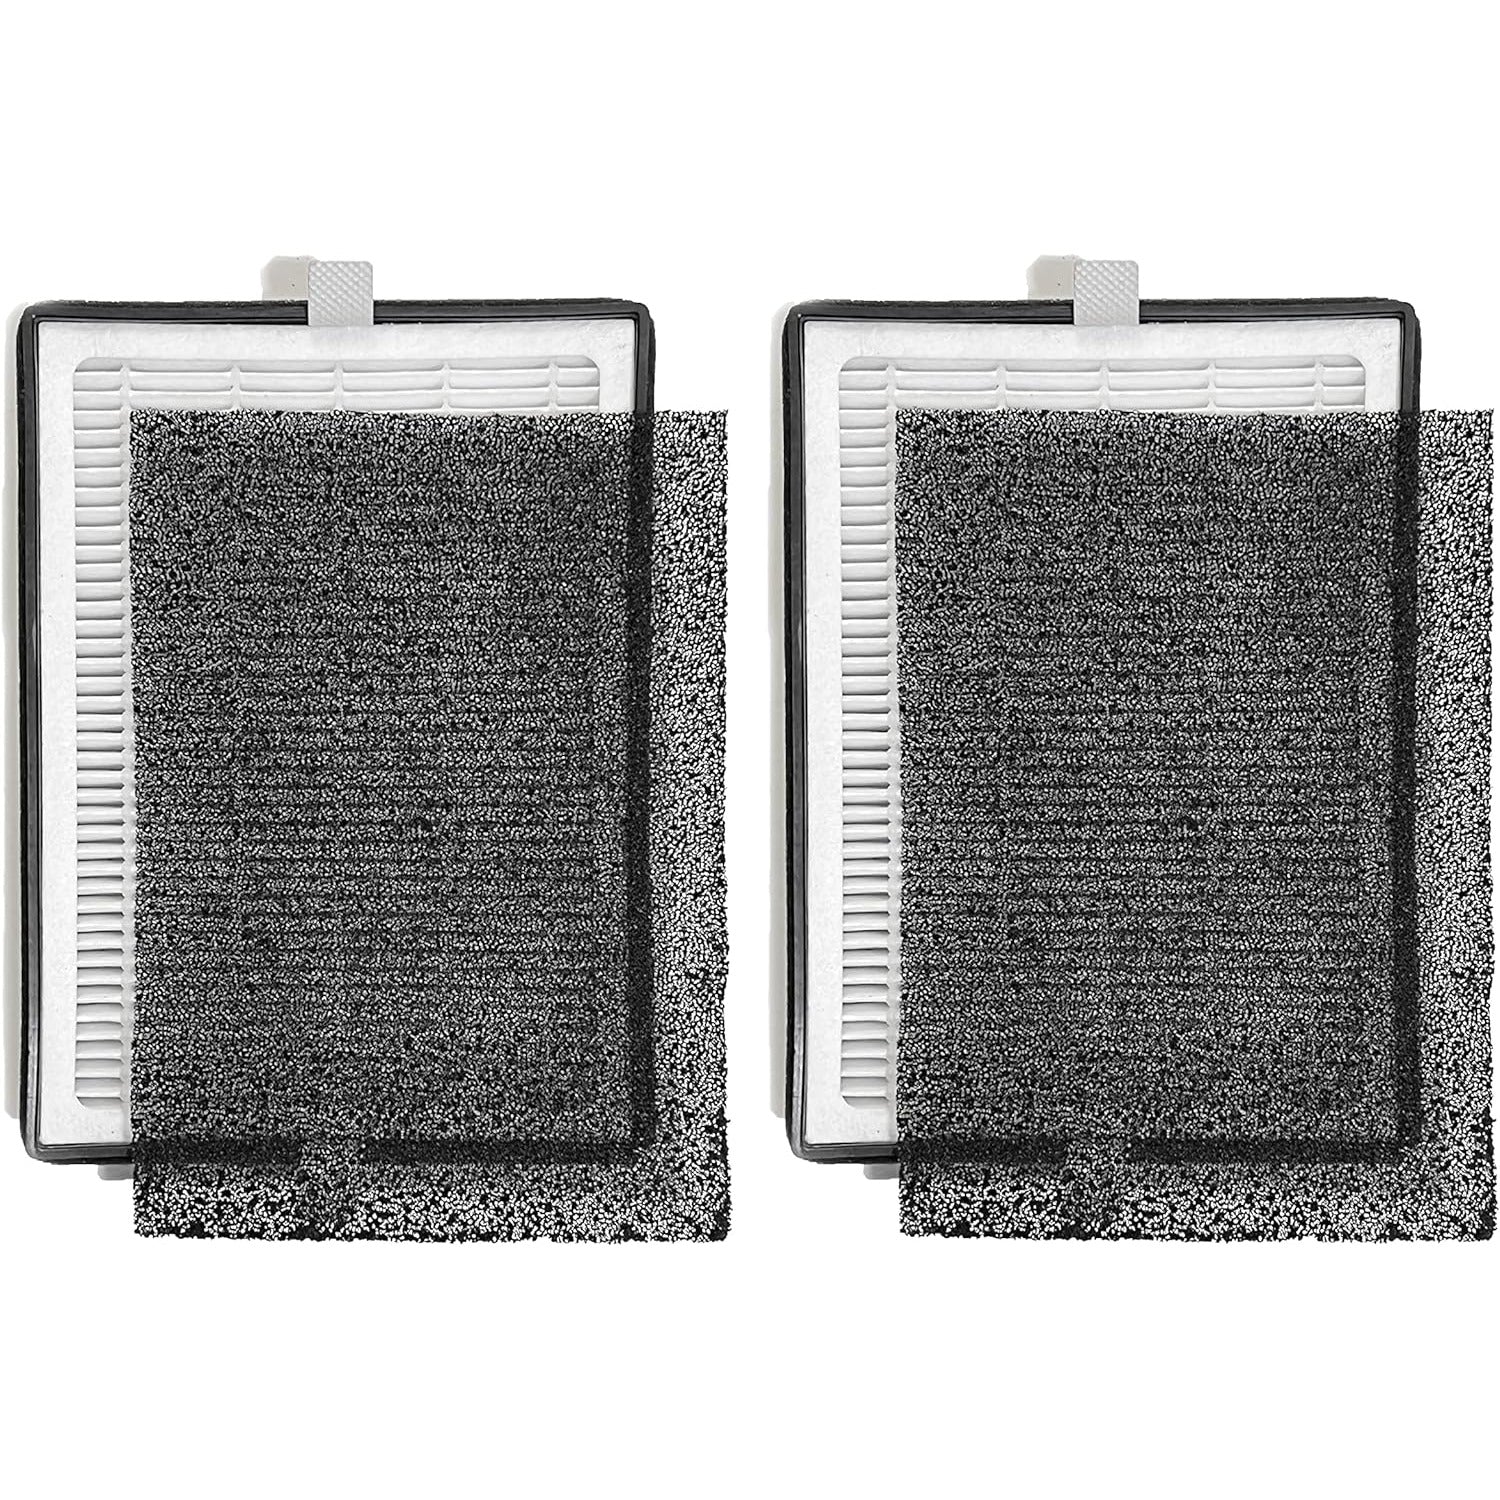 Nispira True HEPA Activated Carbon Pre Filter Replacement Compatible with Levoit Lv-h126 Air Purifier. Compared to Part Lv-h126-rf, 2 Pack, White